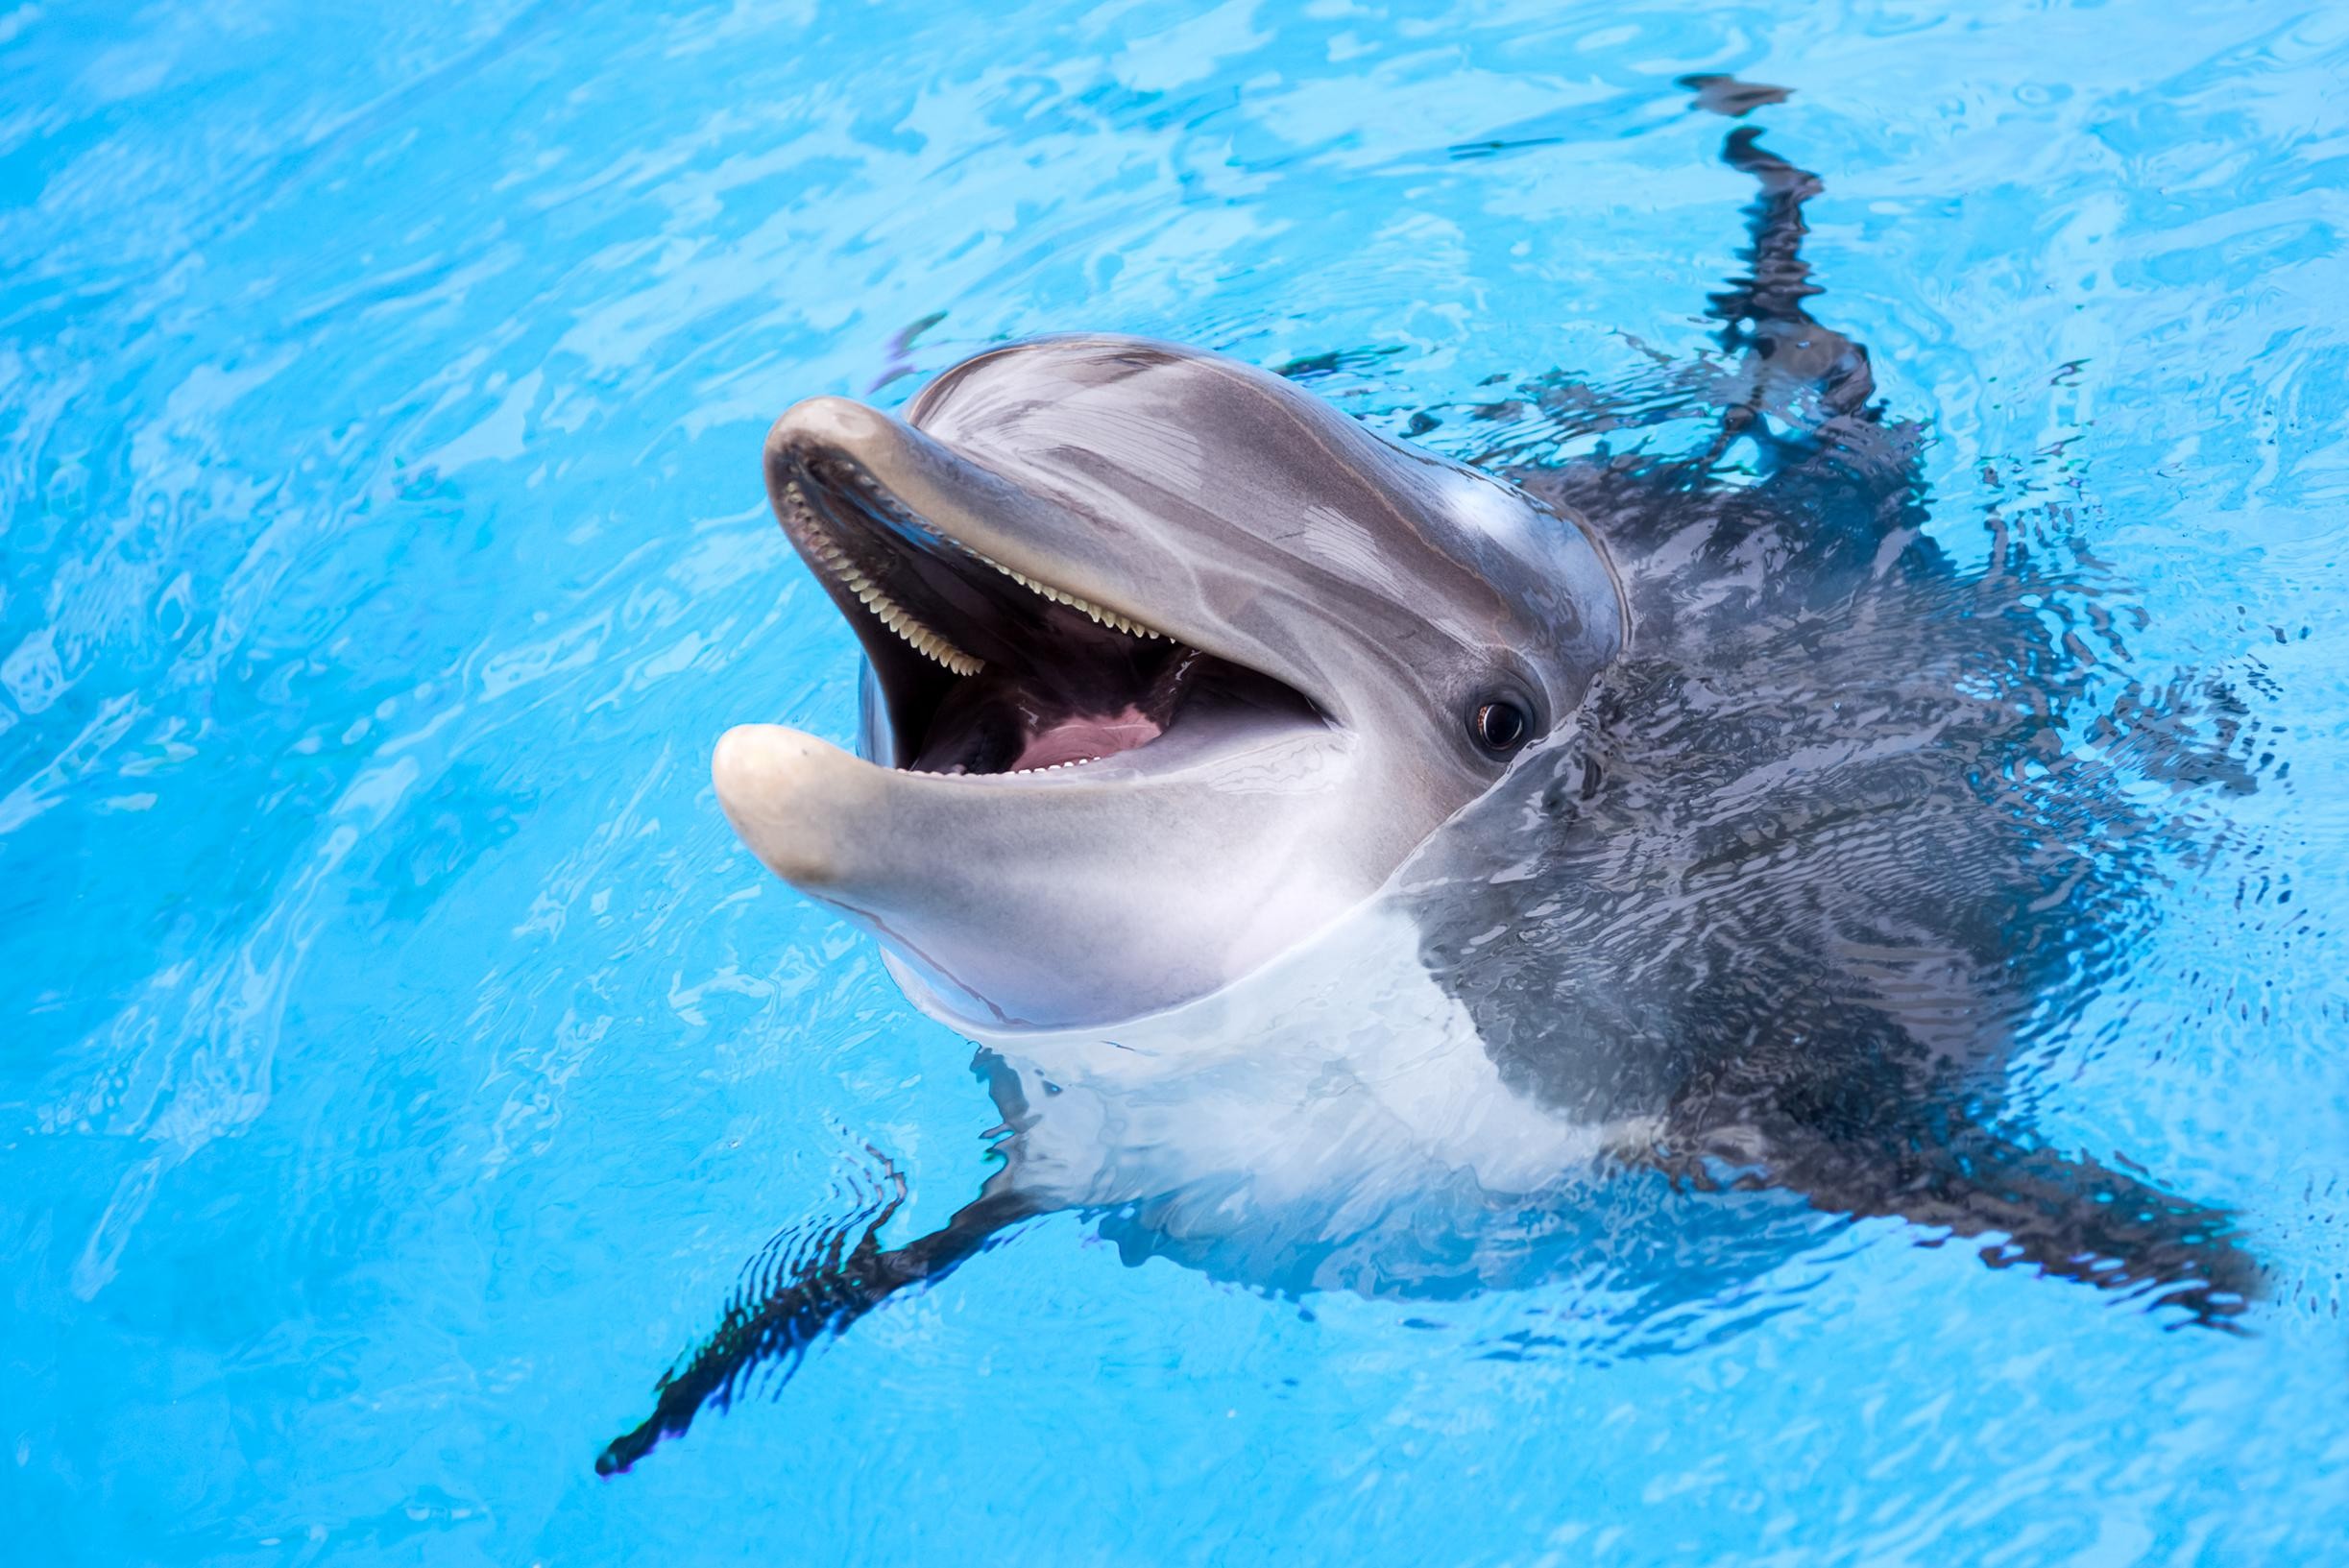 Animal rights activists are outraged that dolphins are being relocated to a ‘chlorine bath in the desert’